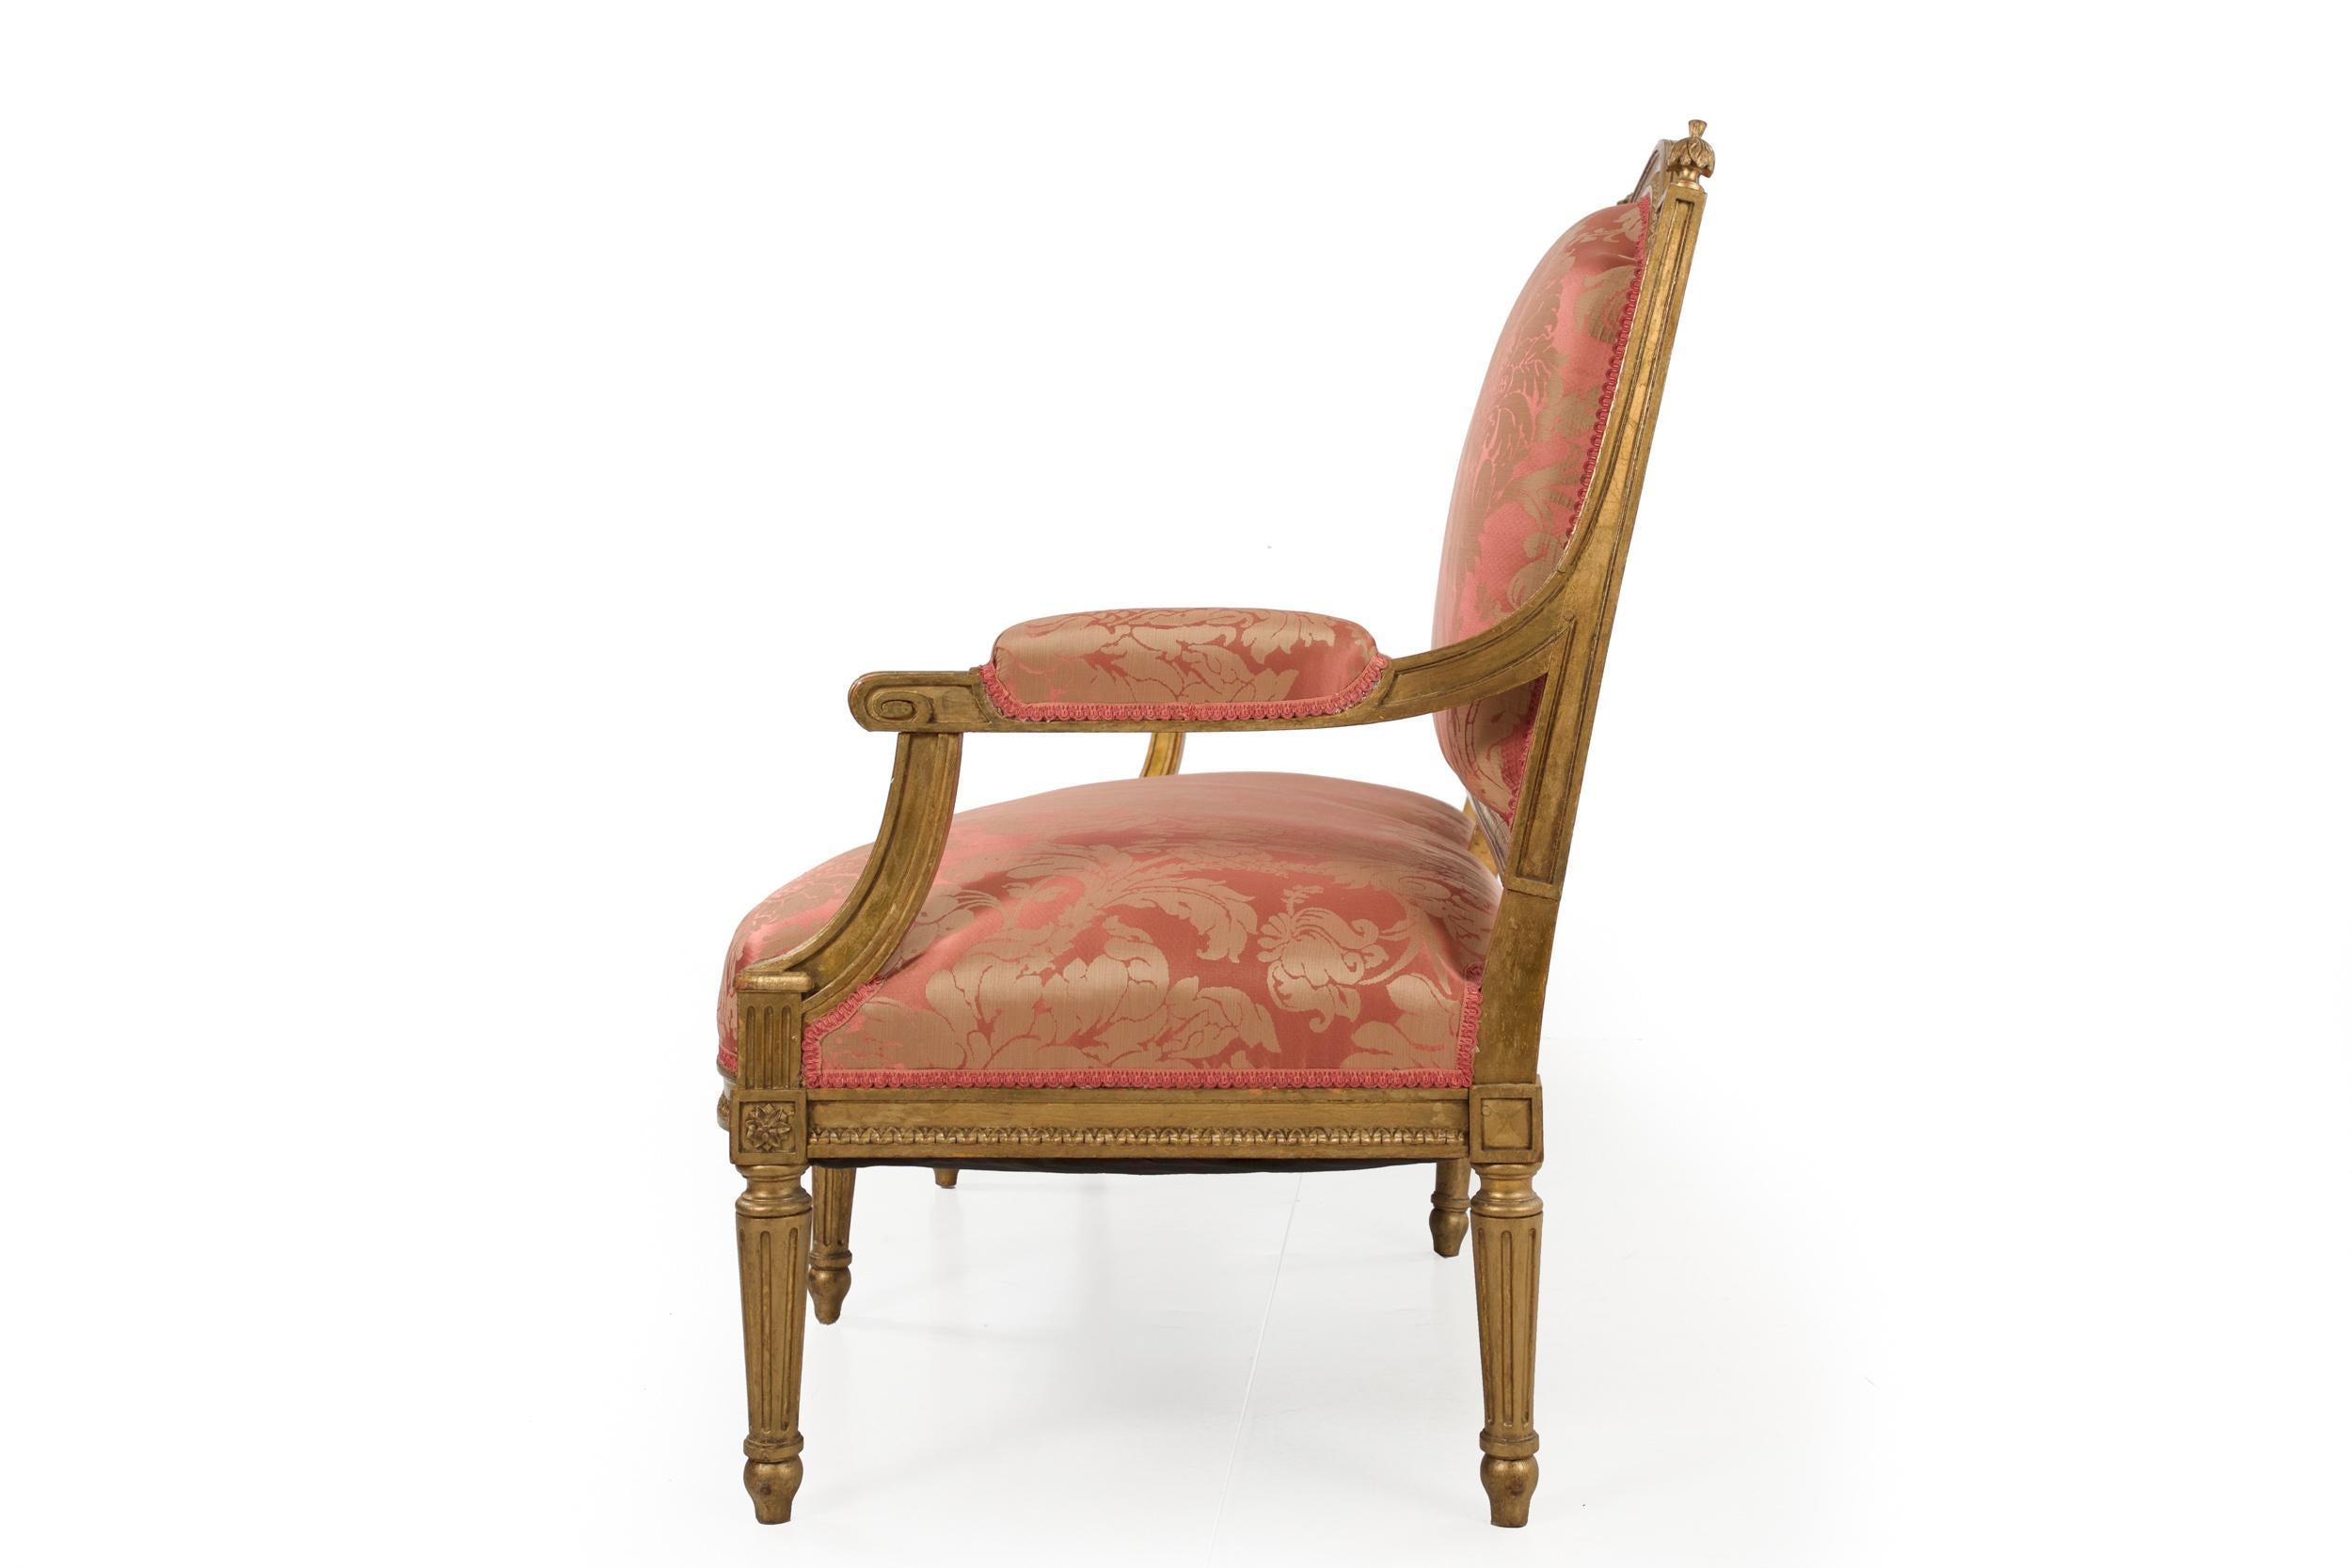 An absolutely gorgeous settee crafted in the Louis XVI taste during the first quarter of the 20th century, it is executed with period craftsmanship utilizing tiny wooden dowels to secure the tenon-mortised joinery and is beautifully finished in a